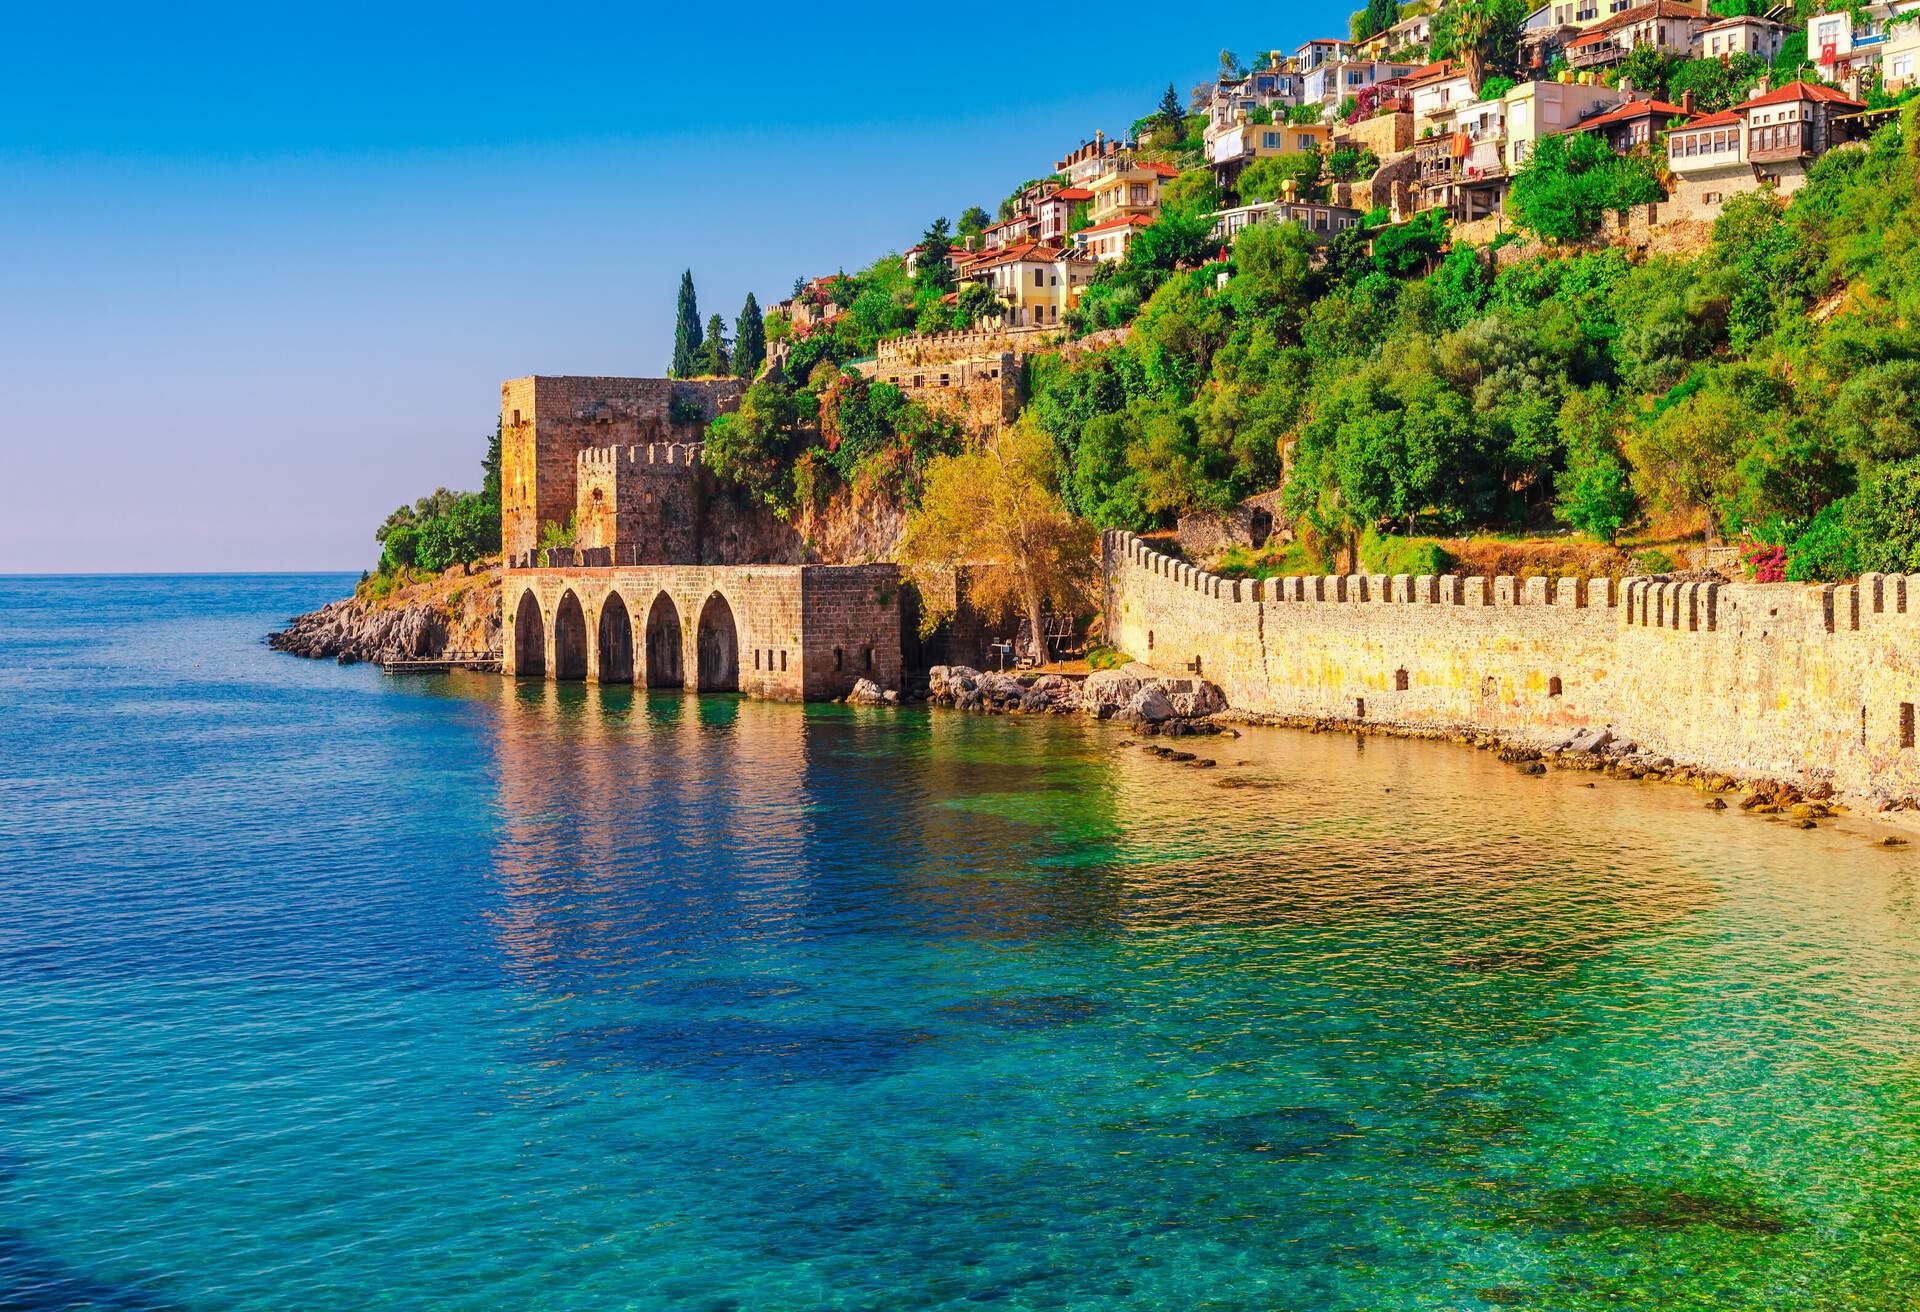 Landscape of ancient shipyard near of Kizil Kule tower in Alanya peninsula, Antalya district, Turkey, Asia. Famous tourist destination with high mountains. Part of ancient old Castle.; Shutterstock ID 613452113; Purchase Order: SF-06928905; Job: ; Client/Licensee: ; Other: